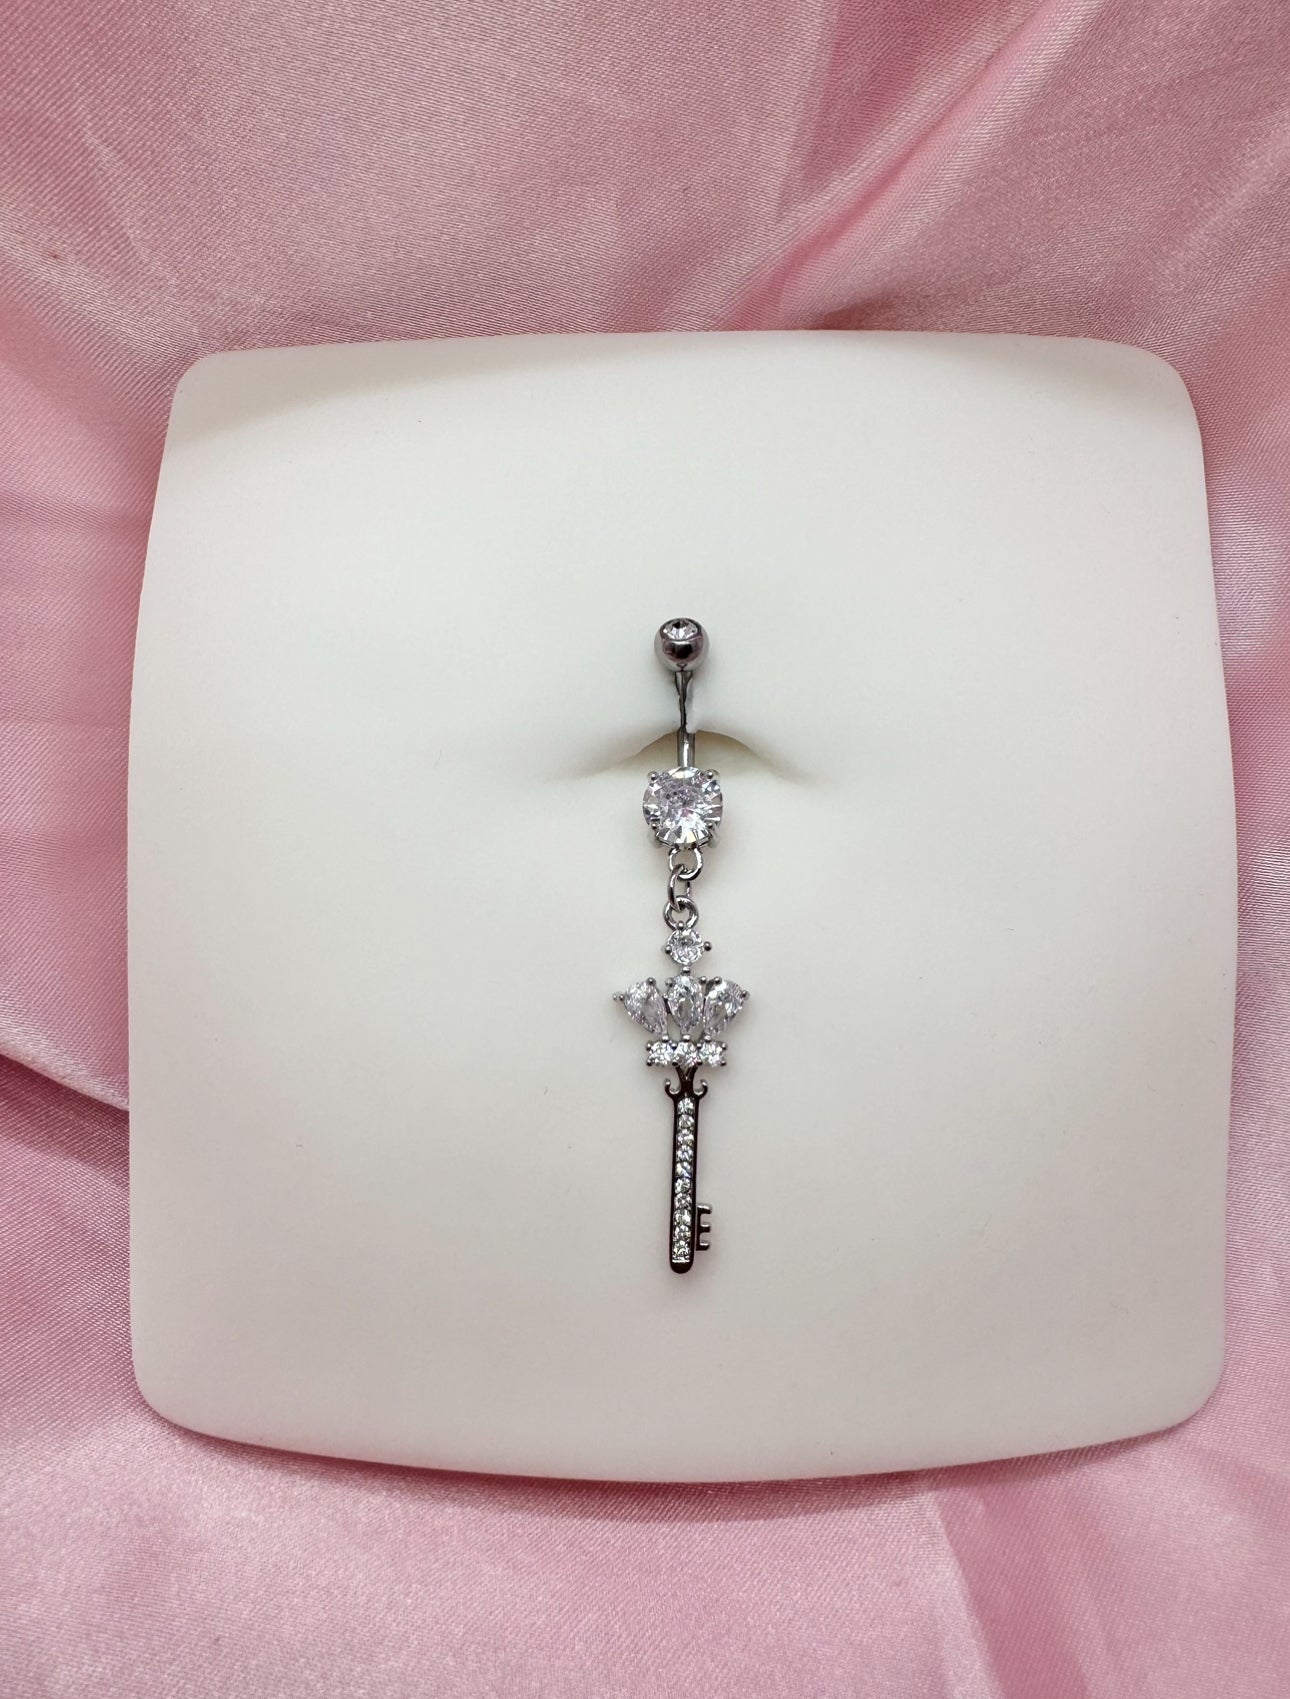 Icy key belly ring